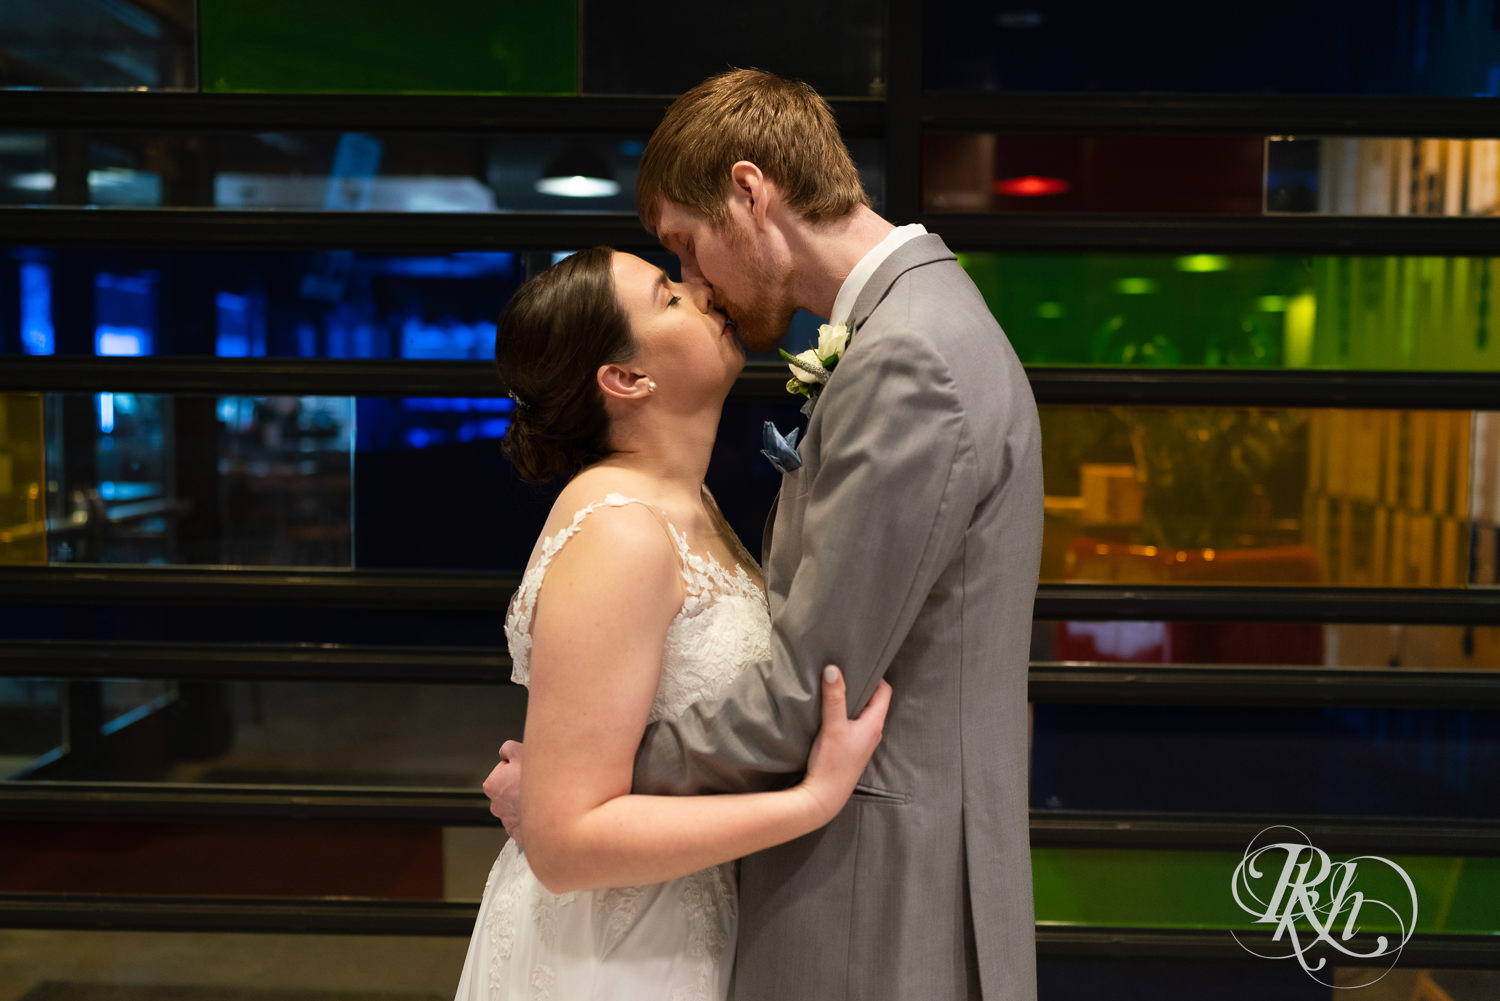 Bride and groom kiss in front of colorful wall at Doubletree Hilton Saint Paul in Saint Paul, Minnesota.